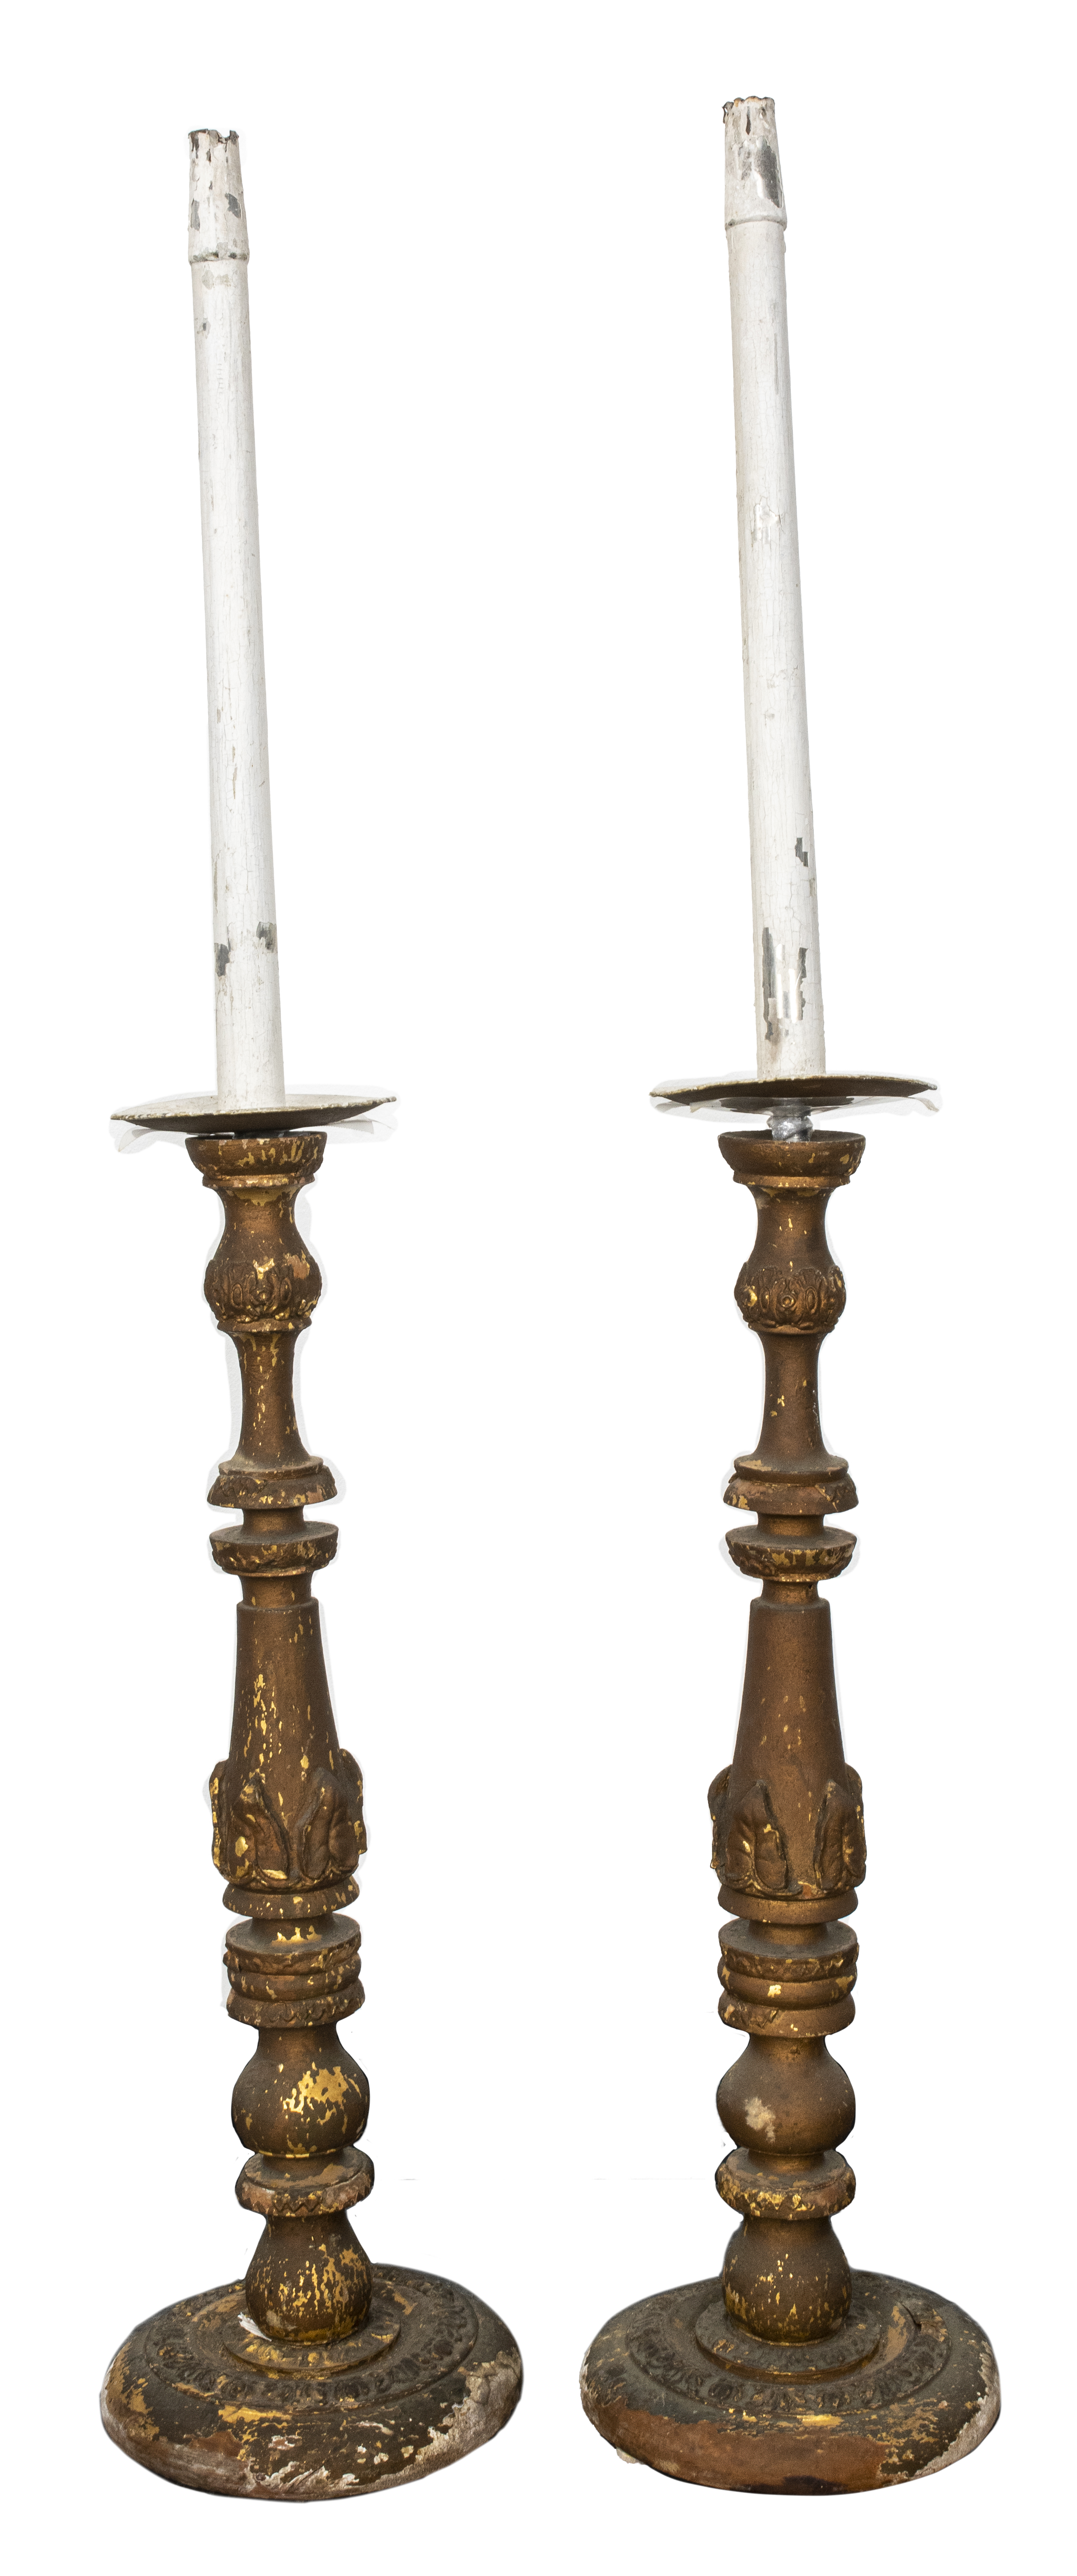 LARGE ITALIAN CARVED WOODEN CANDLESTICKS  2d2ea6